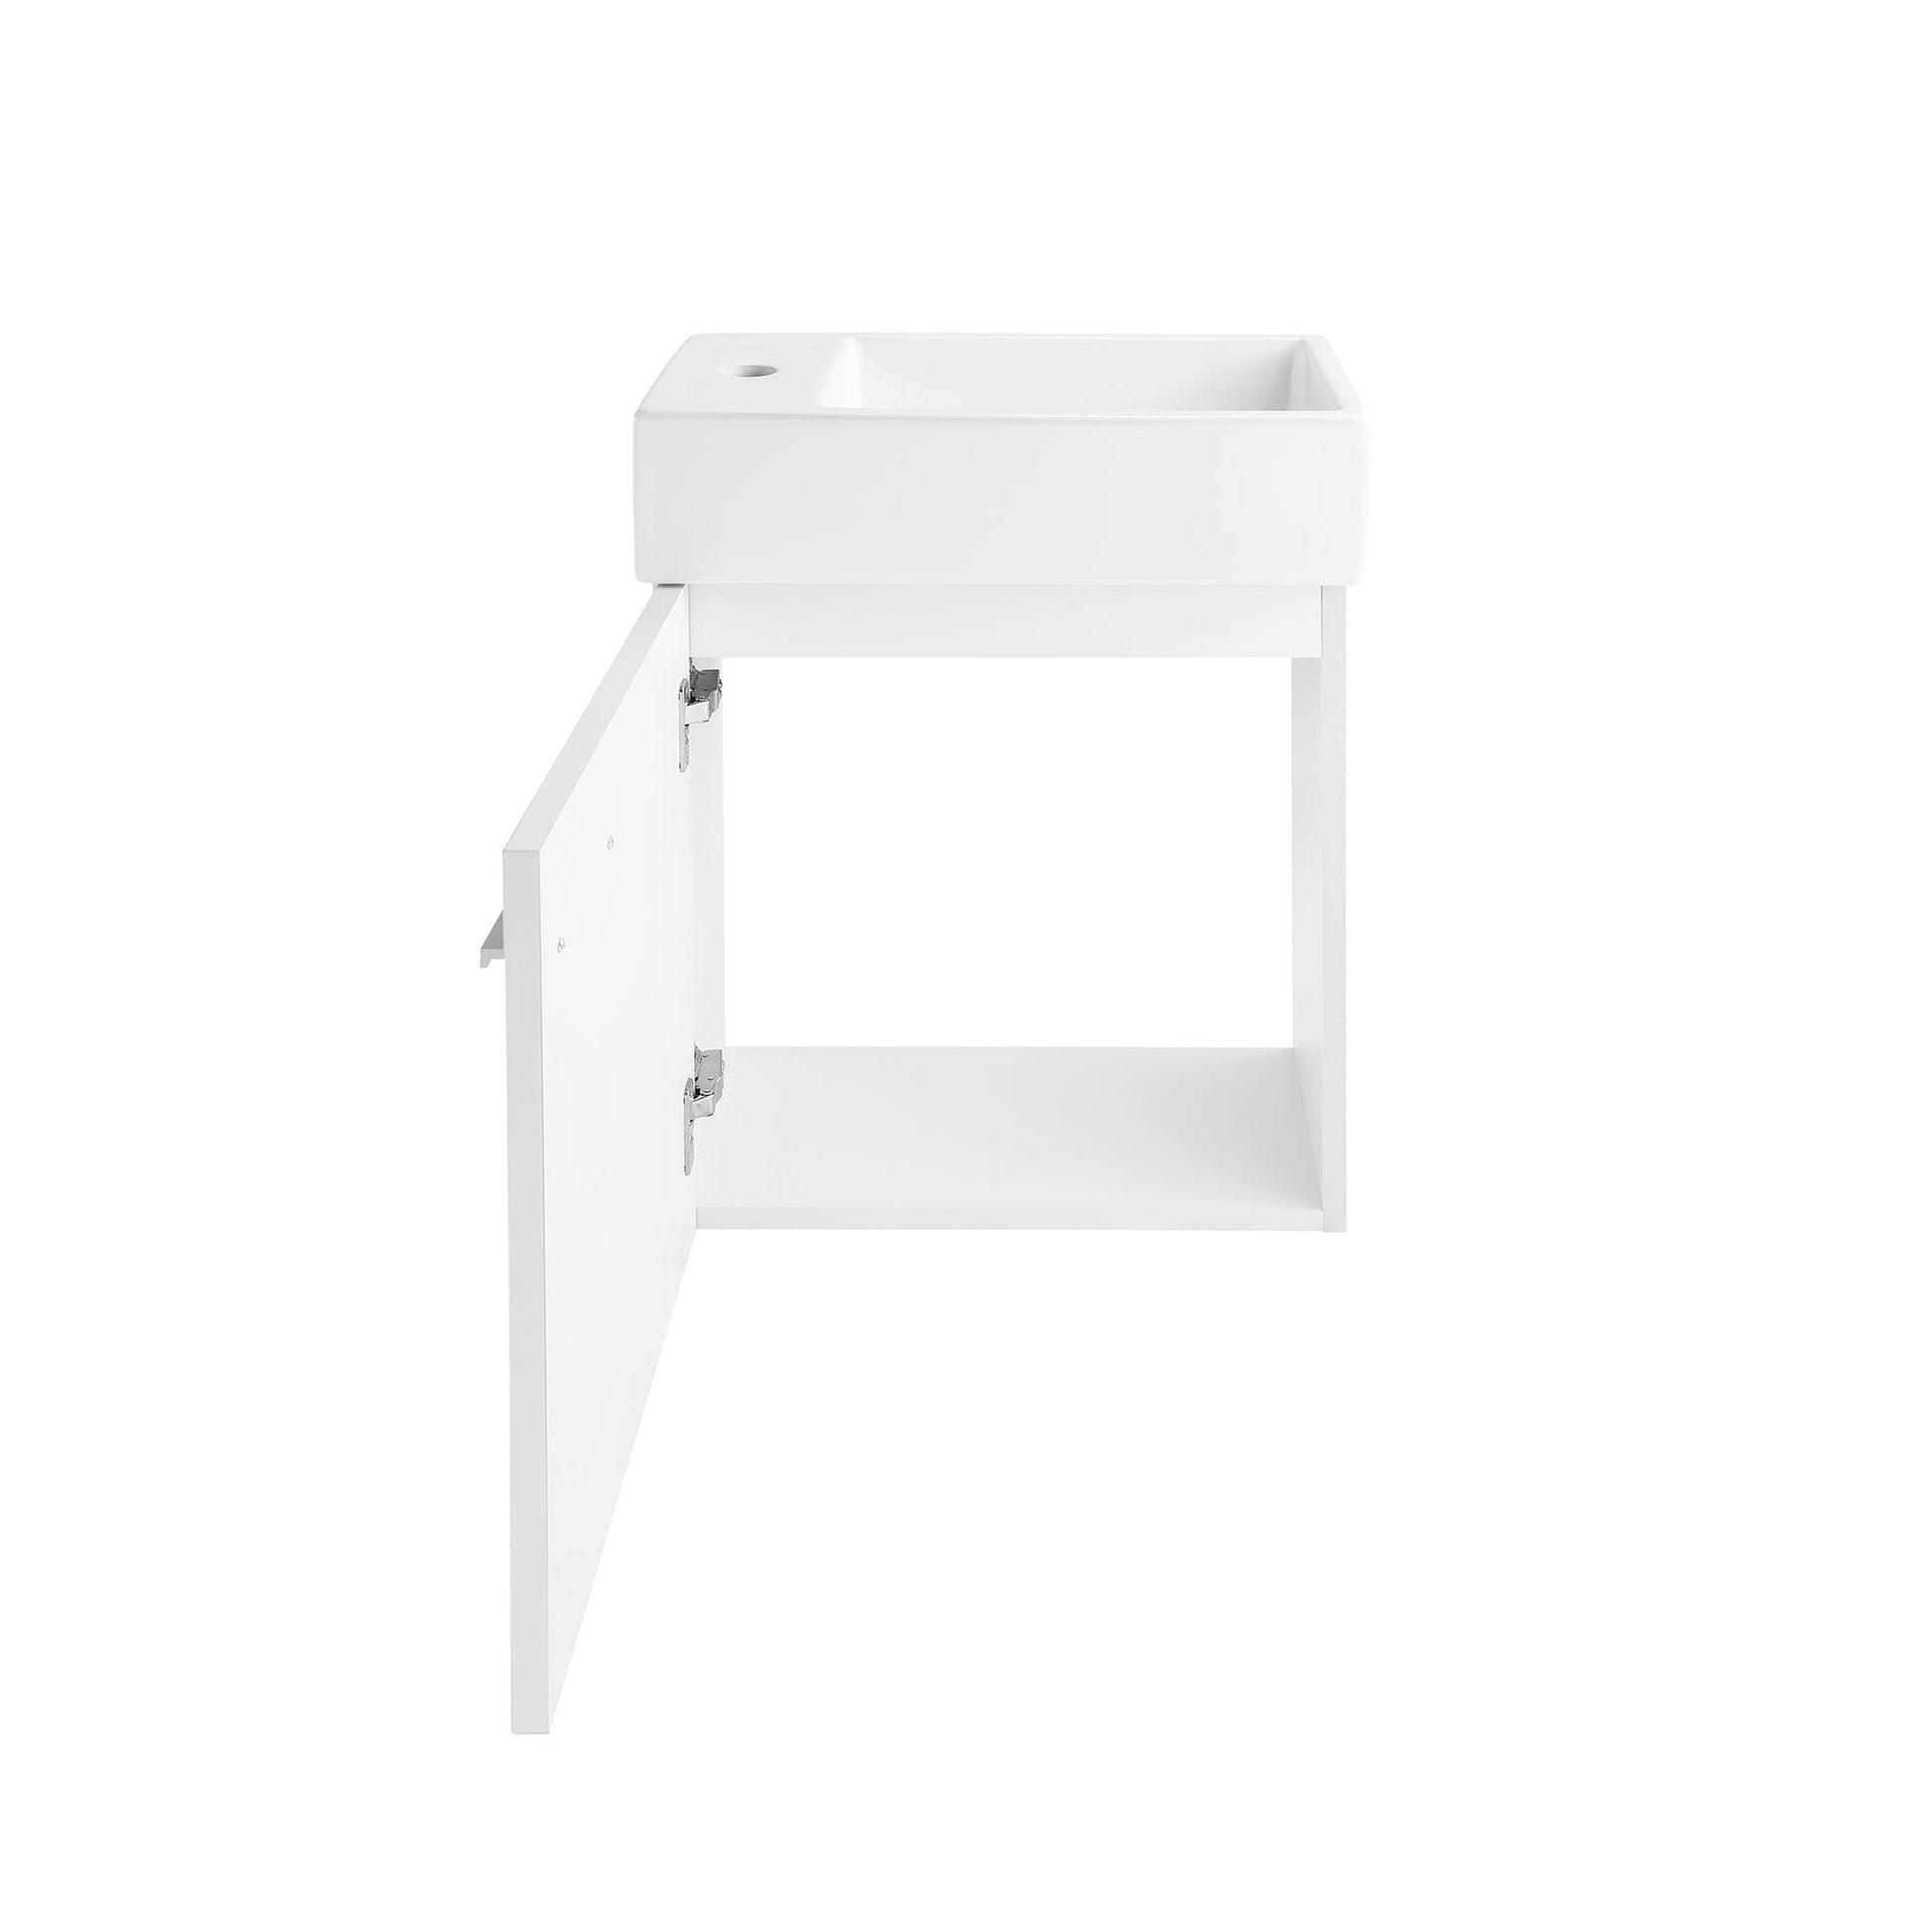 Swiss Madison Colmer 18" x 22" Wall-Mounted Glossy White Bathroom Vanity With Ceramic Single Sink